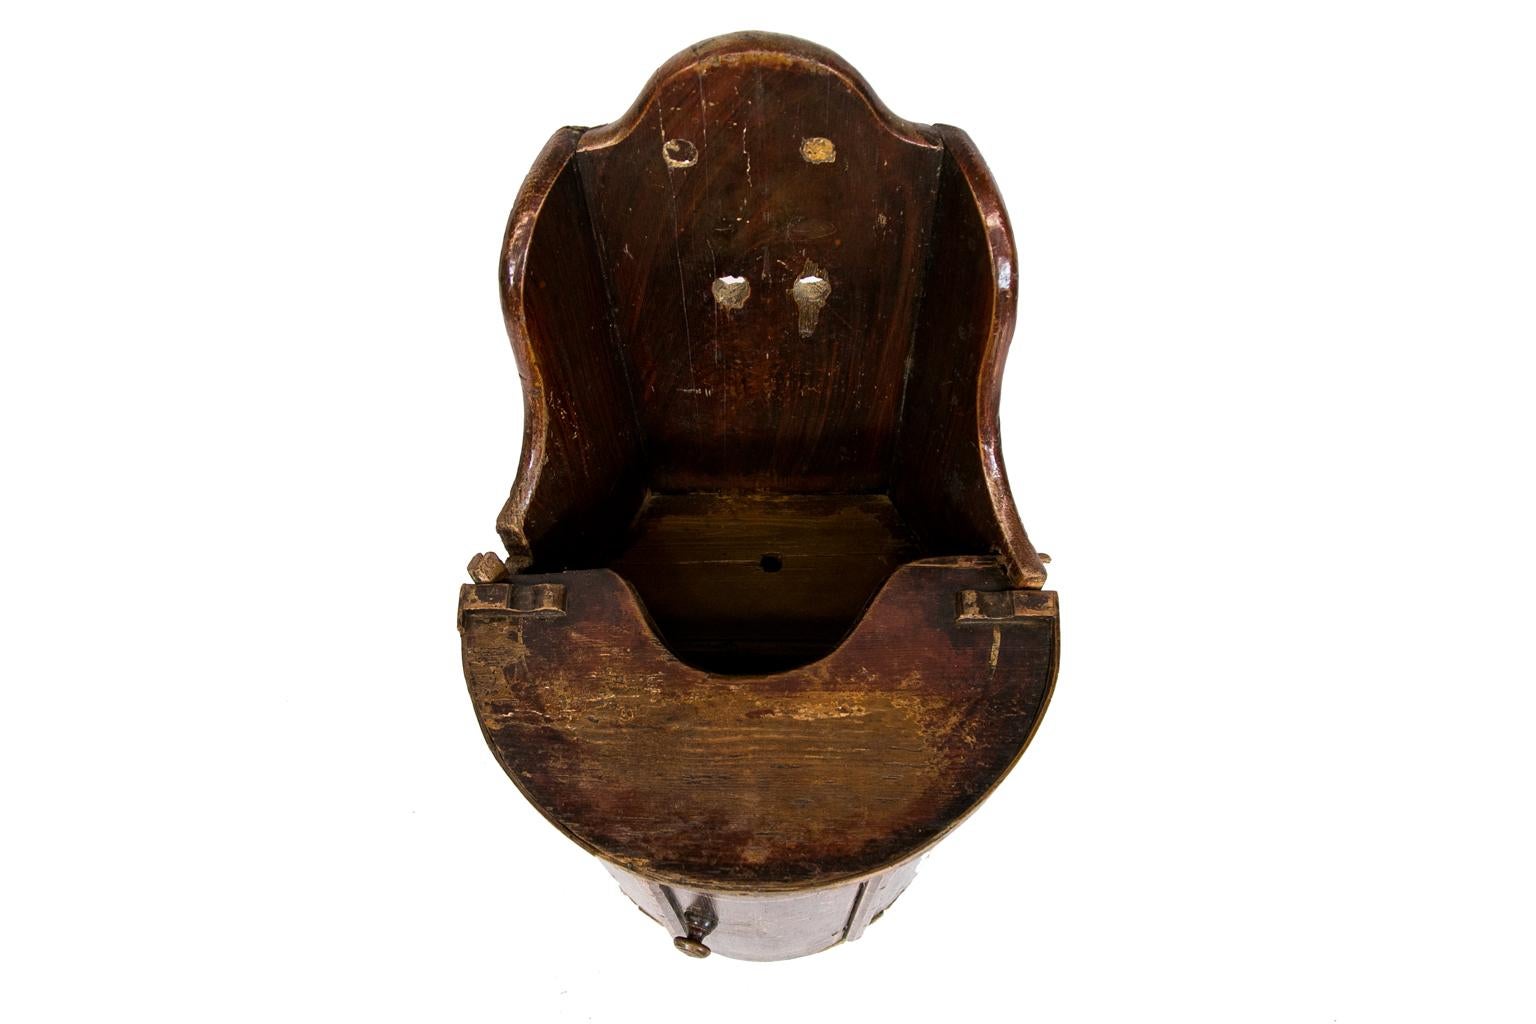 19th century high chair, this youth high chair cabinet can also be used as a potty. It is pine with the original red paint faux painted to simulate rich wood. It has a bow front with white designs in the door which is opened by the original turn